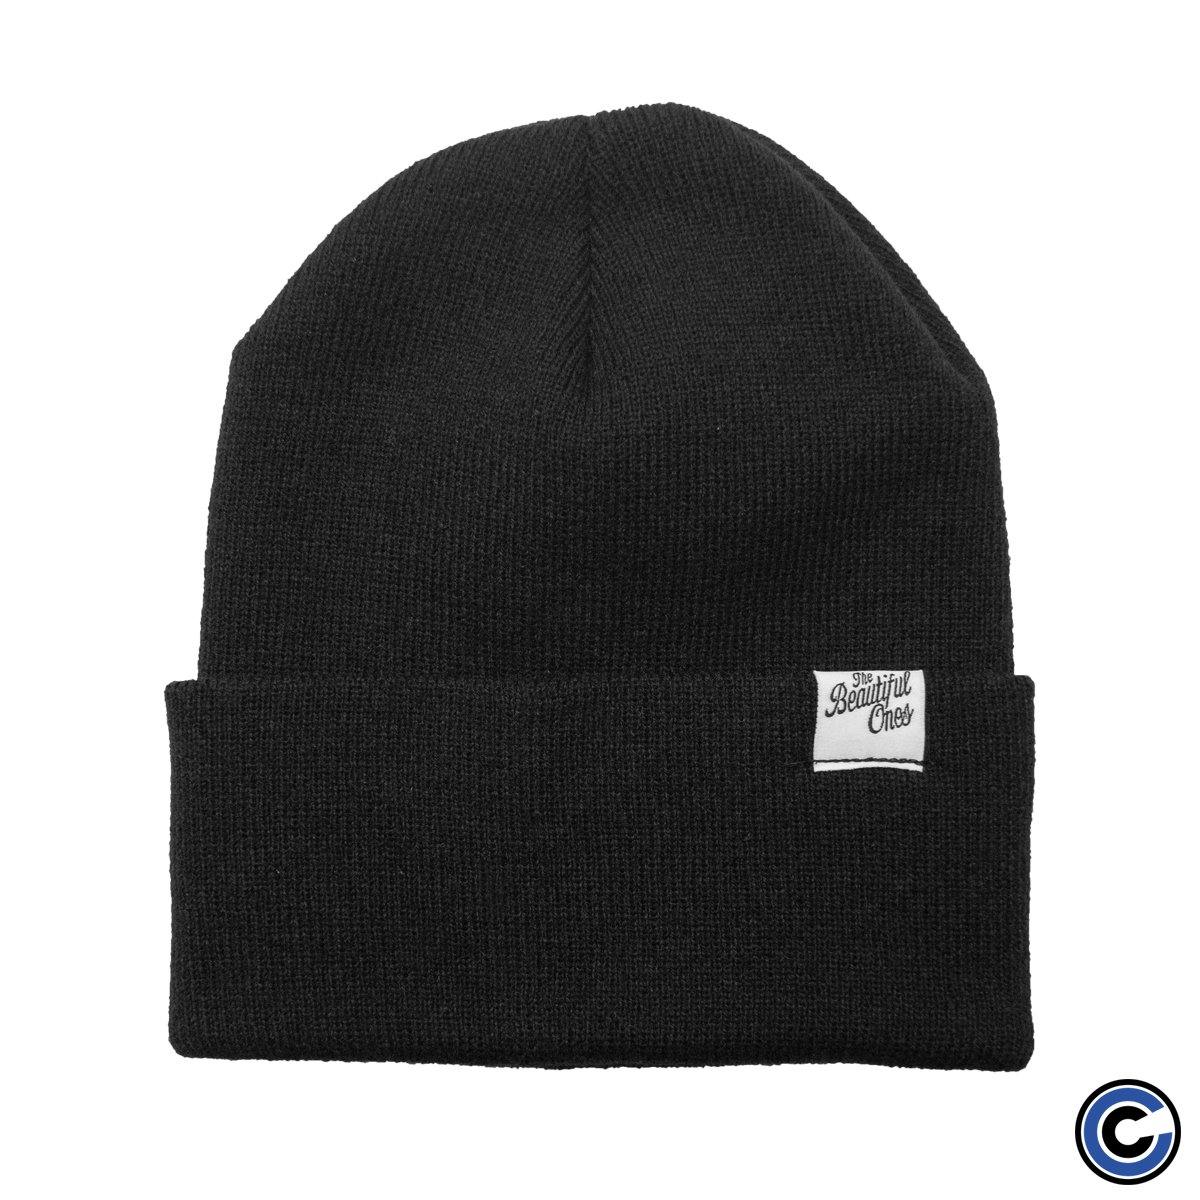 Buy – The Beautiful Ones "Script Patch" Beanie – Band & Music Merch – Cold Cuts Merch